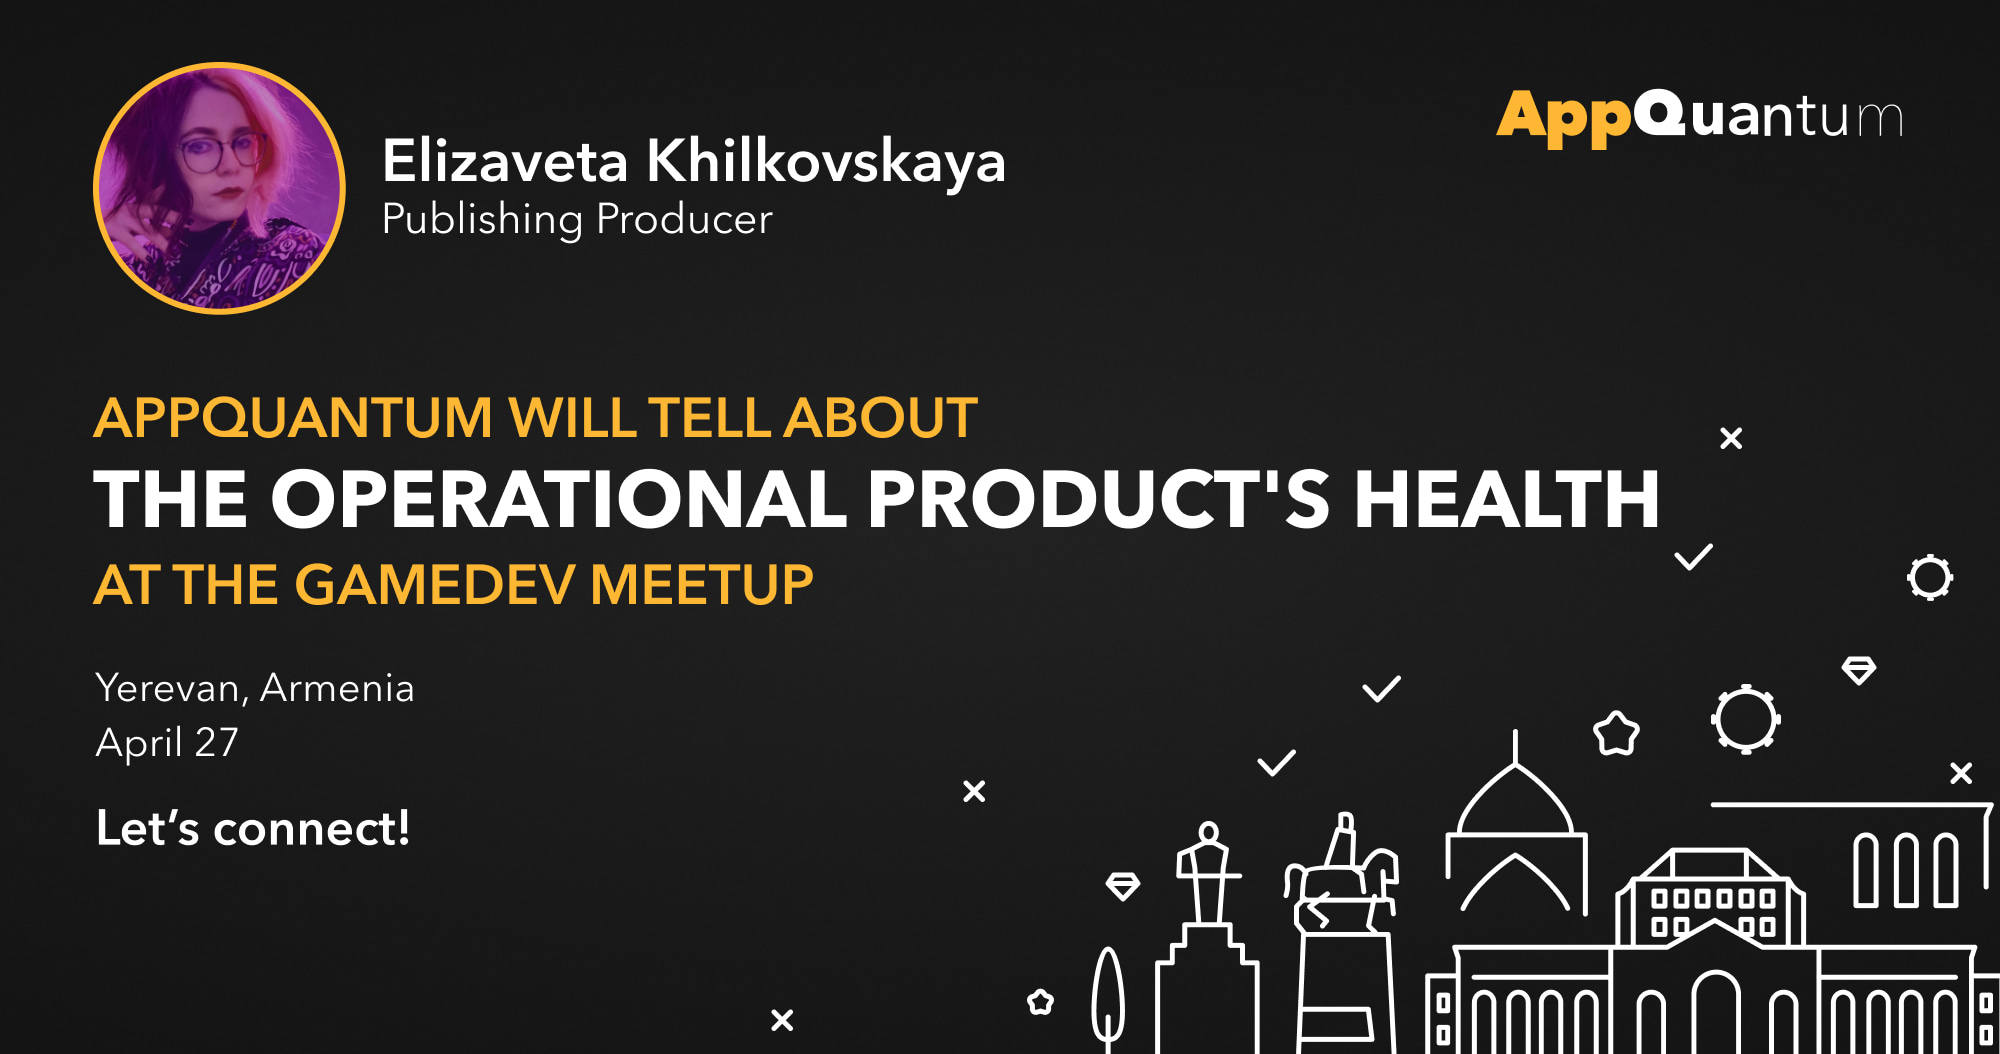 AppQuantum Will Tell About The Operational Product's Health at the Gamedev Meetup in Yerevan